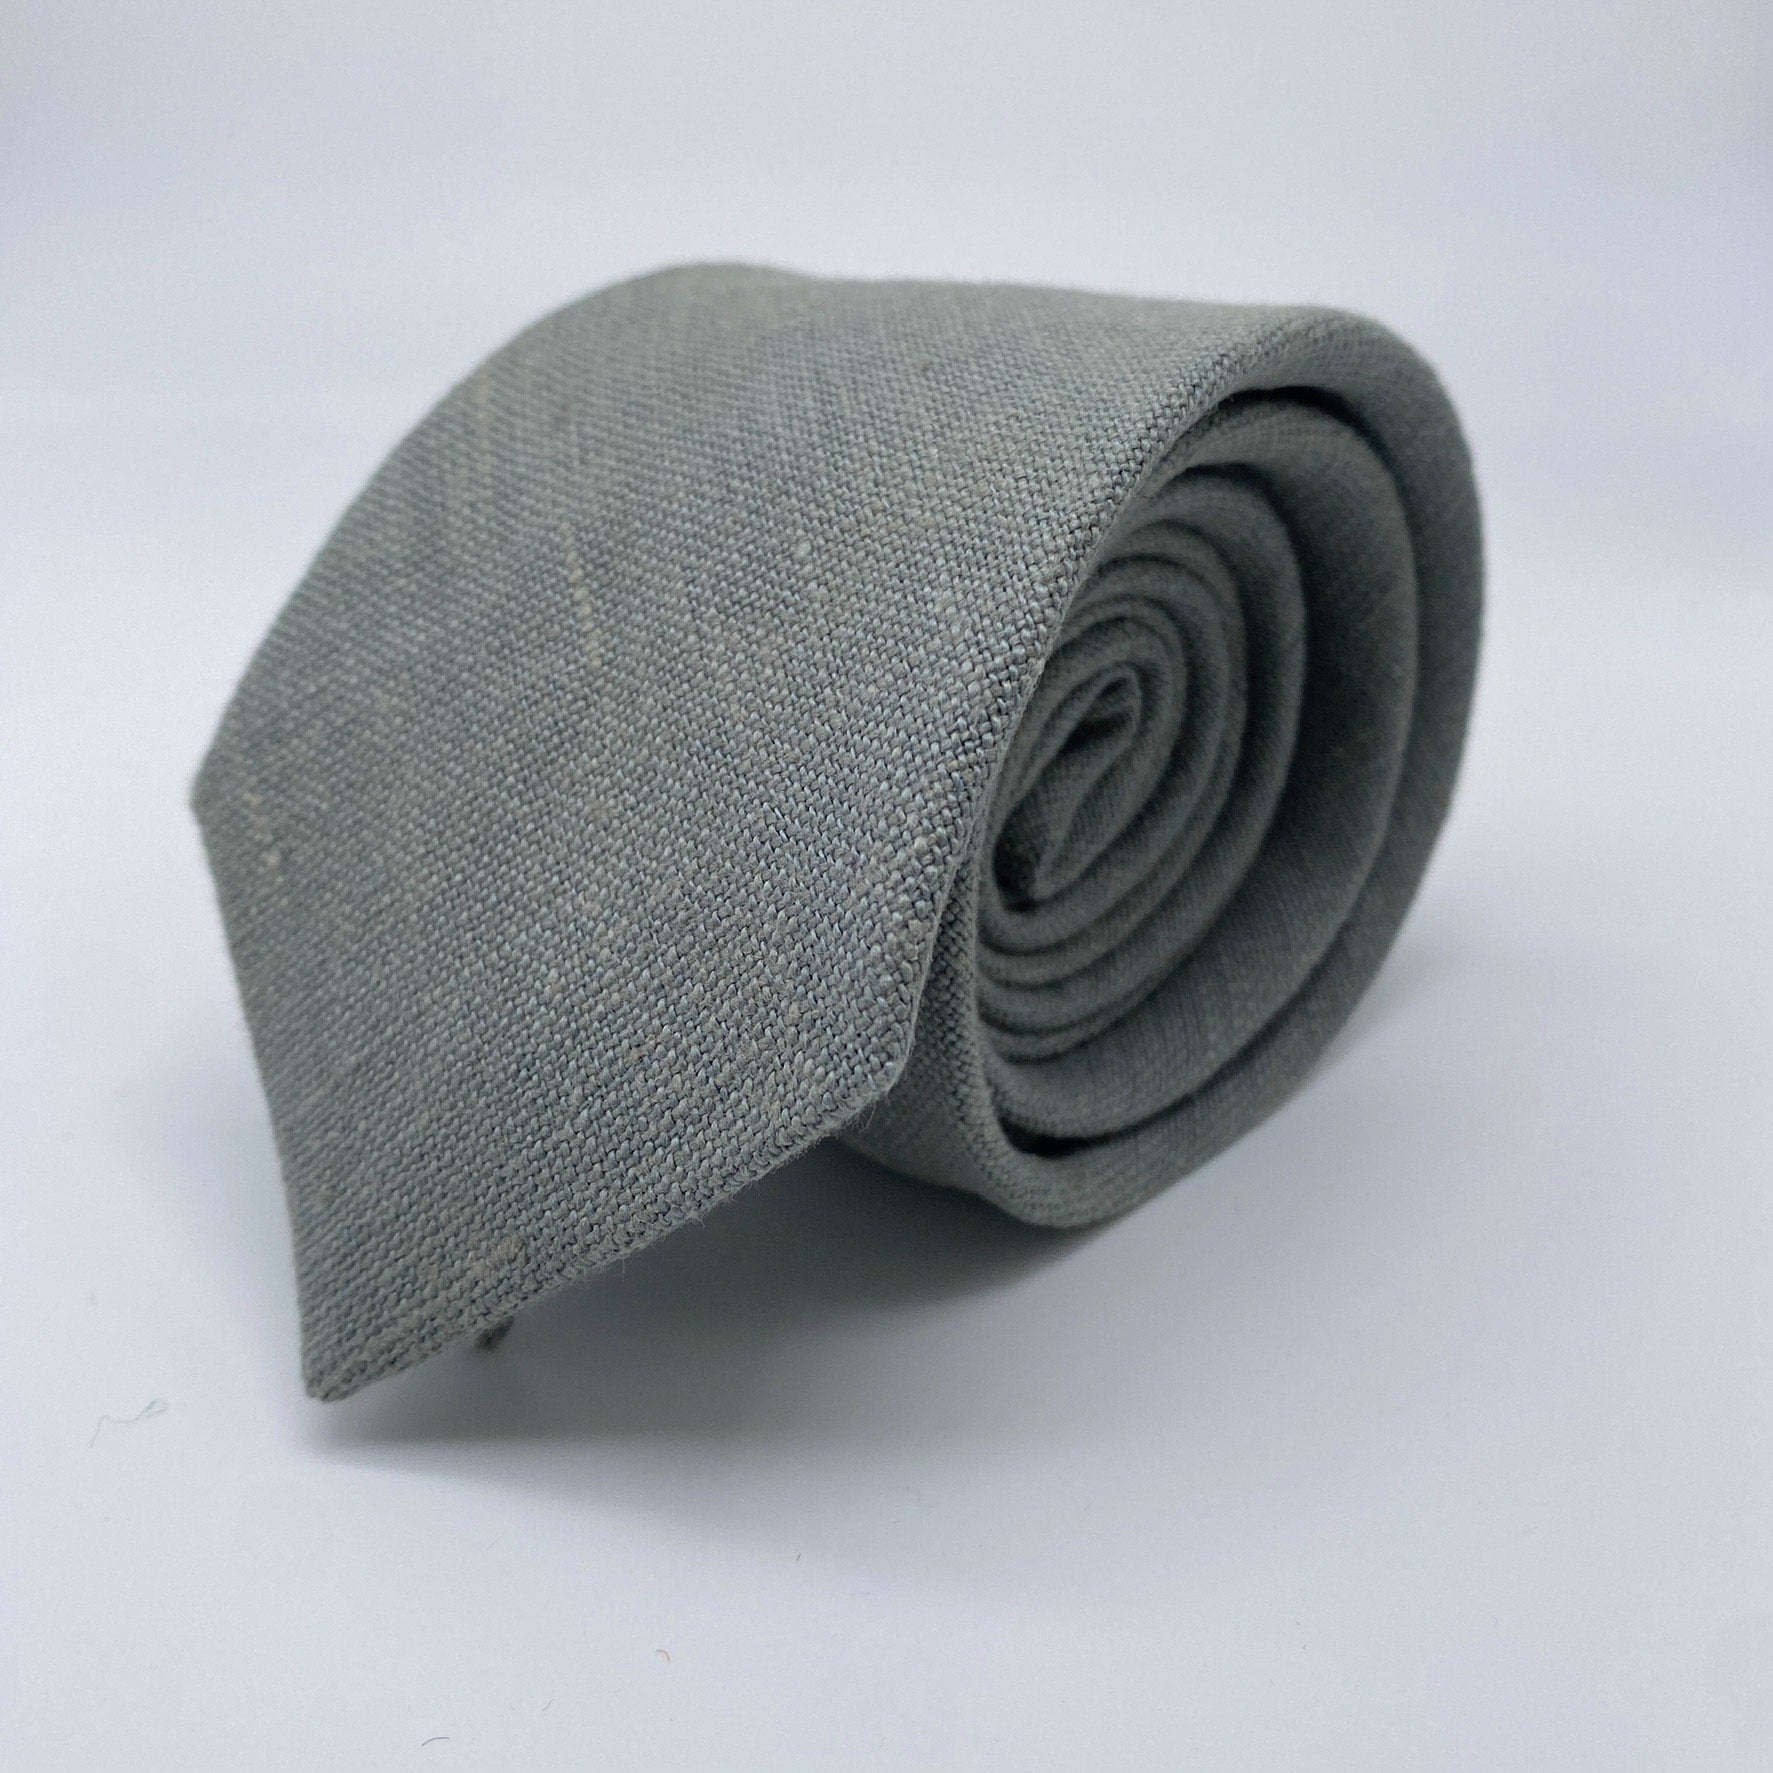 Irish Linen Tie in Sage Green by the Belfast Bow Company